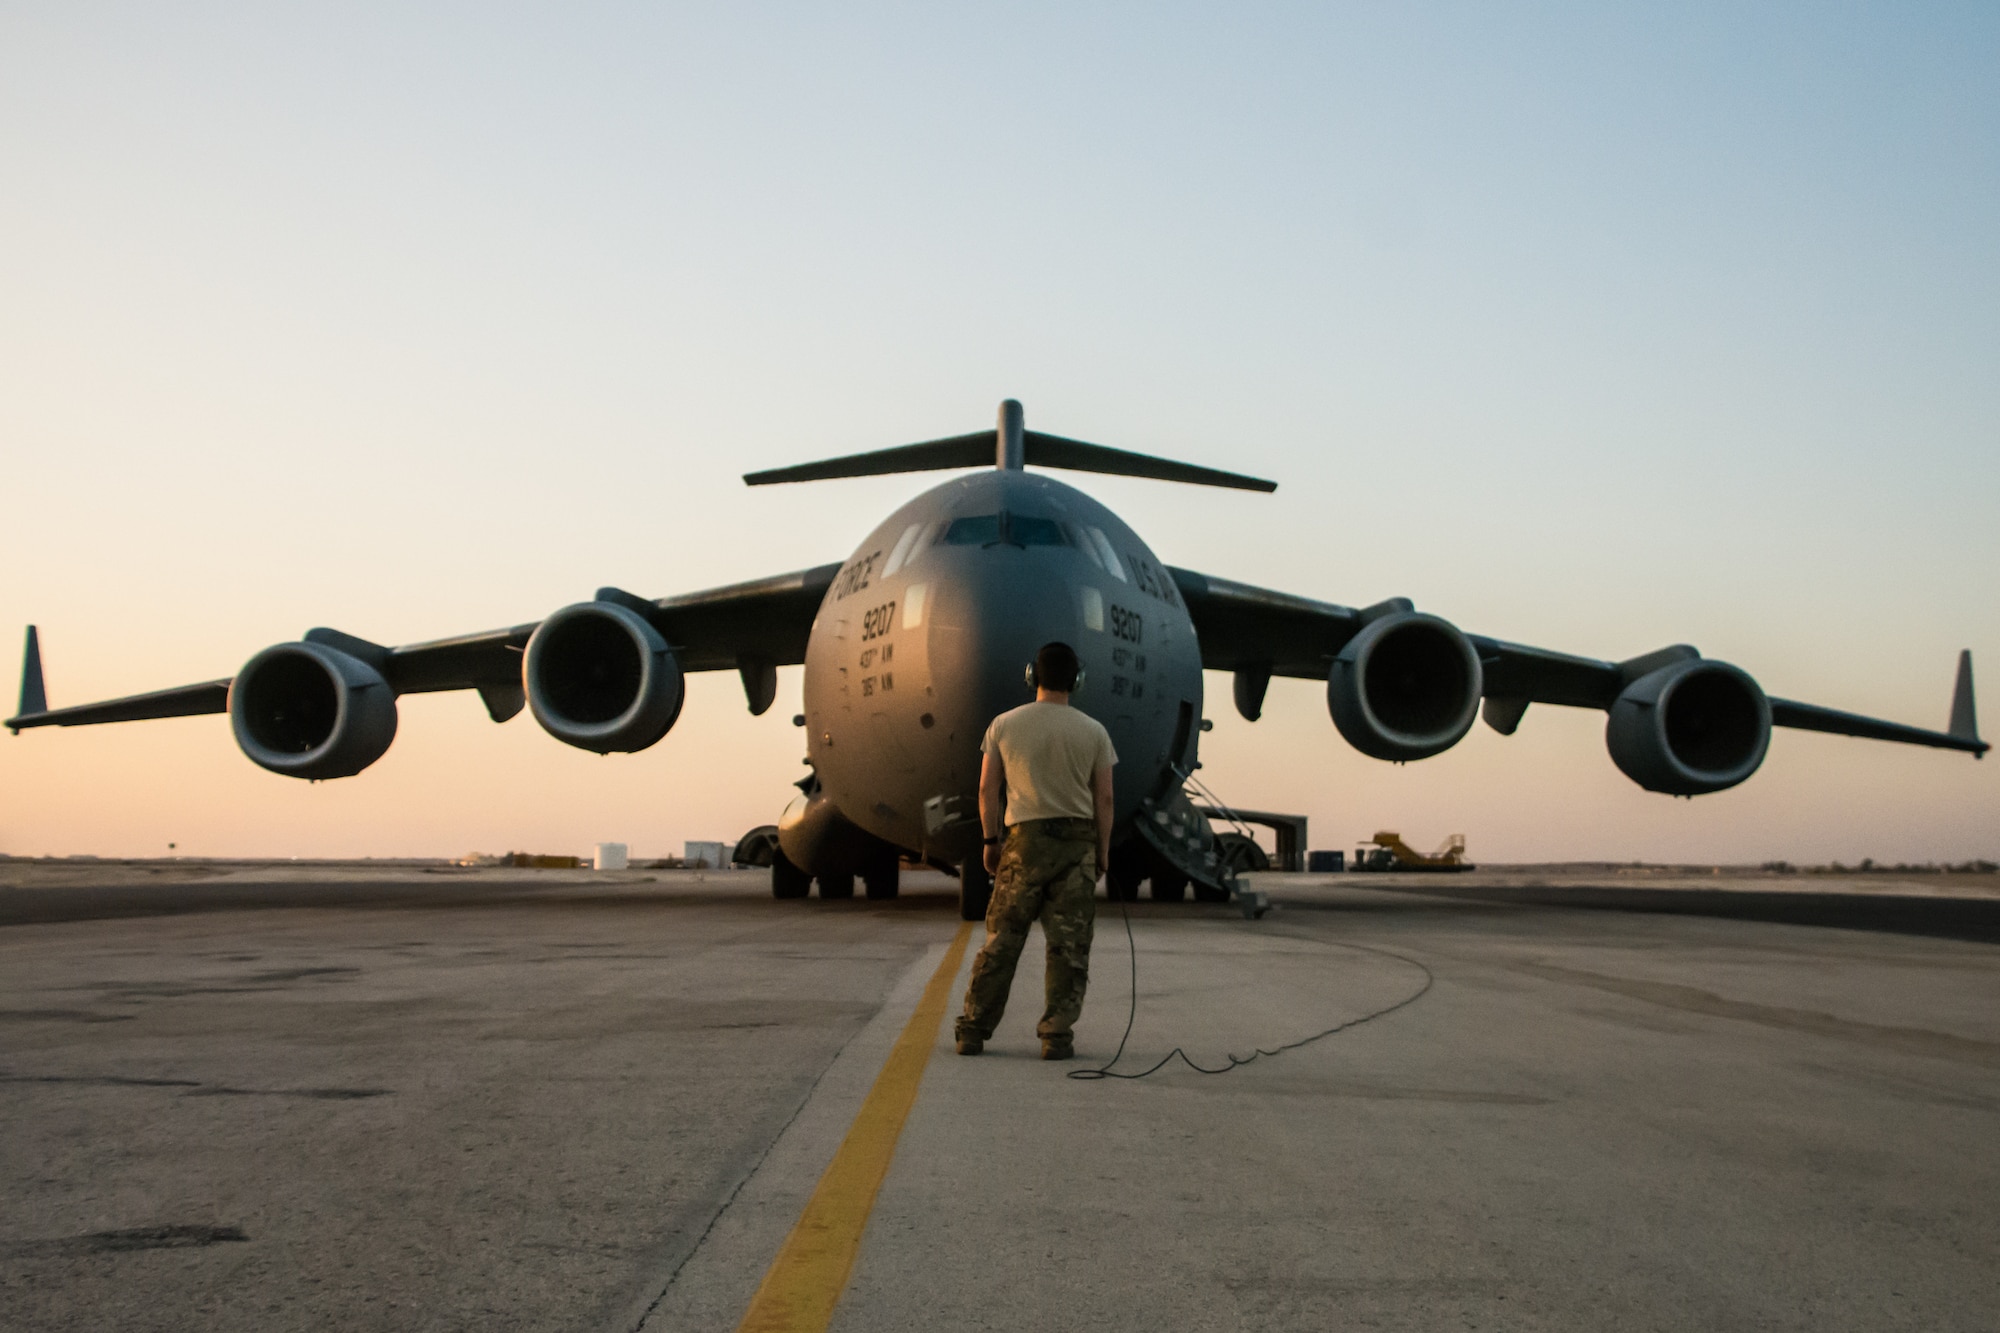 A C-17 Globemaster III is prepared for departure at an undisclosed location in Southwest Asia after transporting cargo between U.S. Africa Command and U.S. Central Command, Aug. 28, 2018. Al Udeid-based aircraft have completed nearly 15 missions this calendar year between the two commands. (U.S. Air Force photo by Tech. Sgt. Ted Nichols/Released)